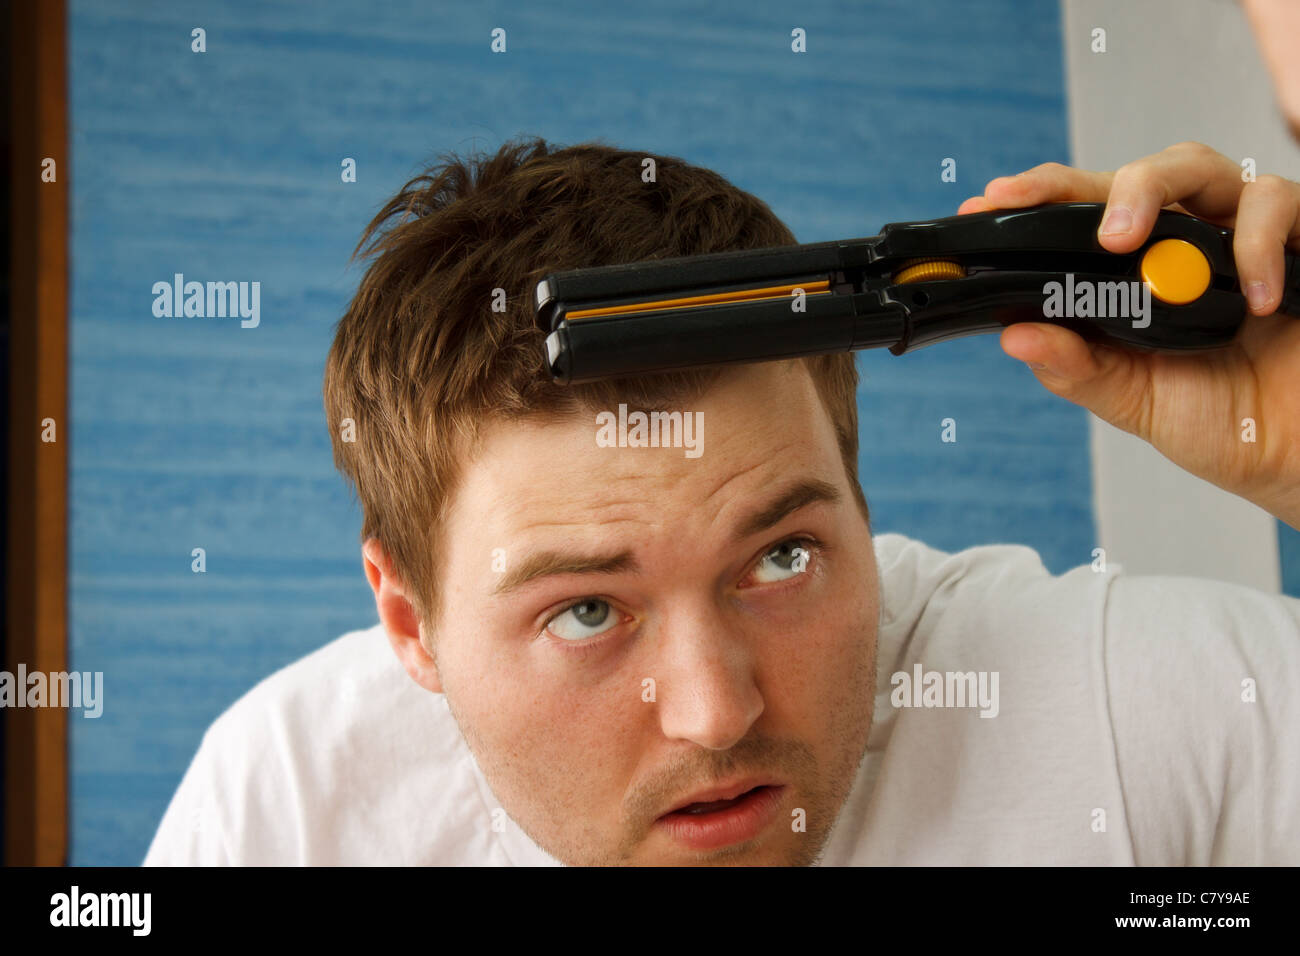 Young man attempting to straighten bangs in mirror with straightener Stock Photo